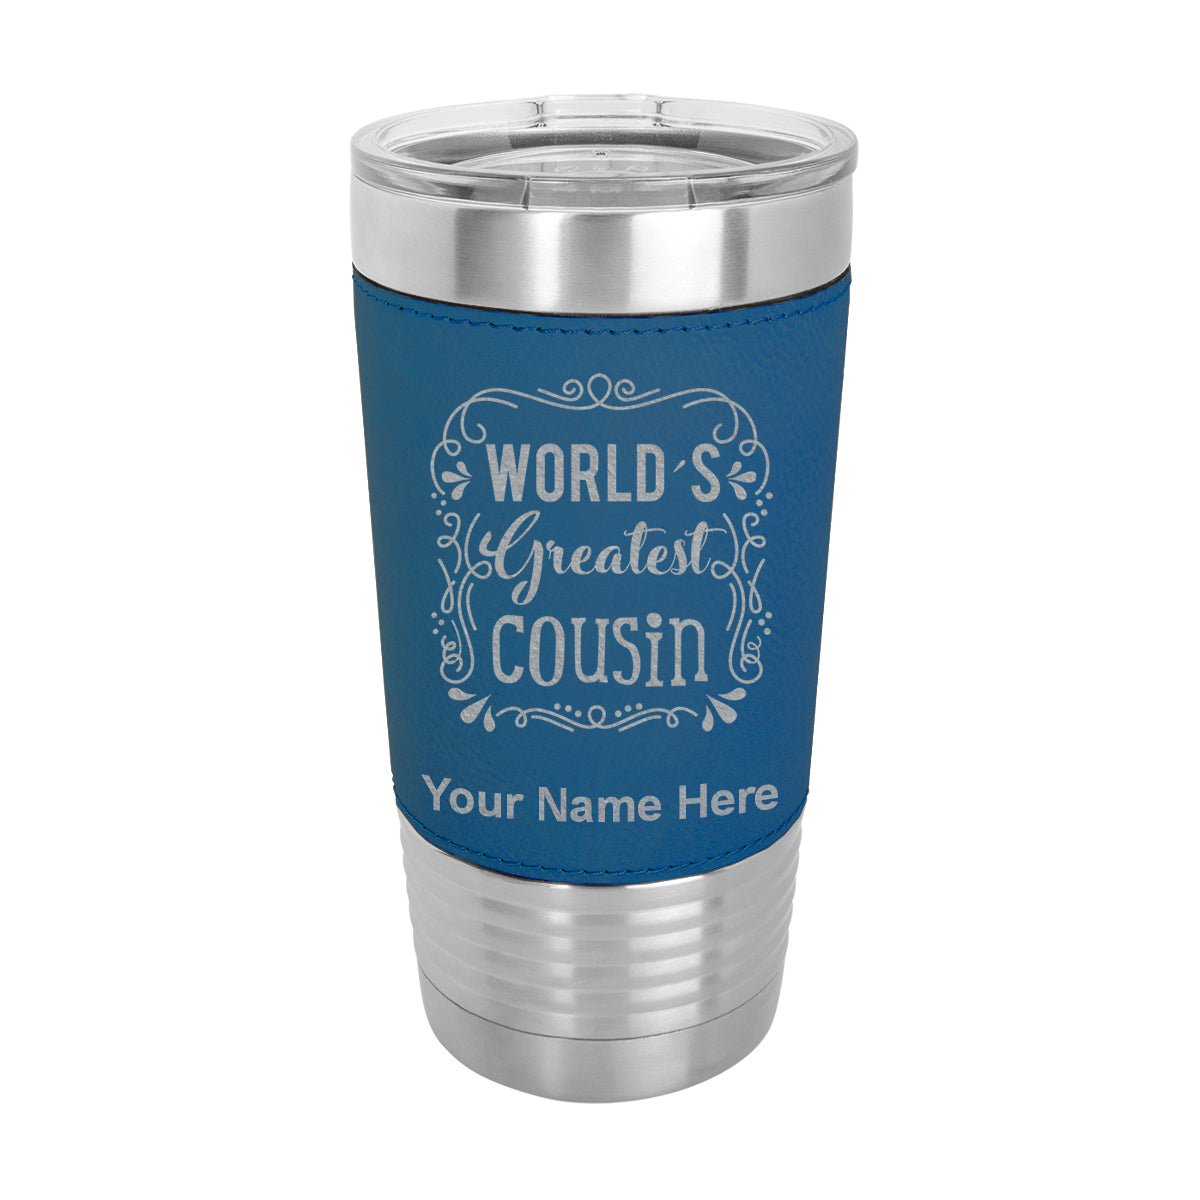 20oz Faux Leather Tumbler Mug, World's Greatest Cousin, Personalized Engraving Included